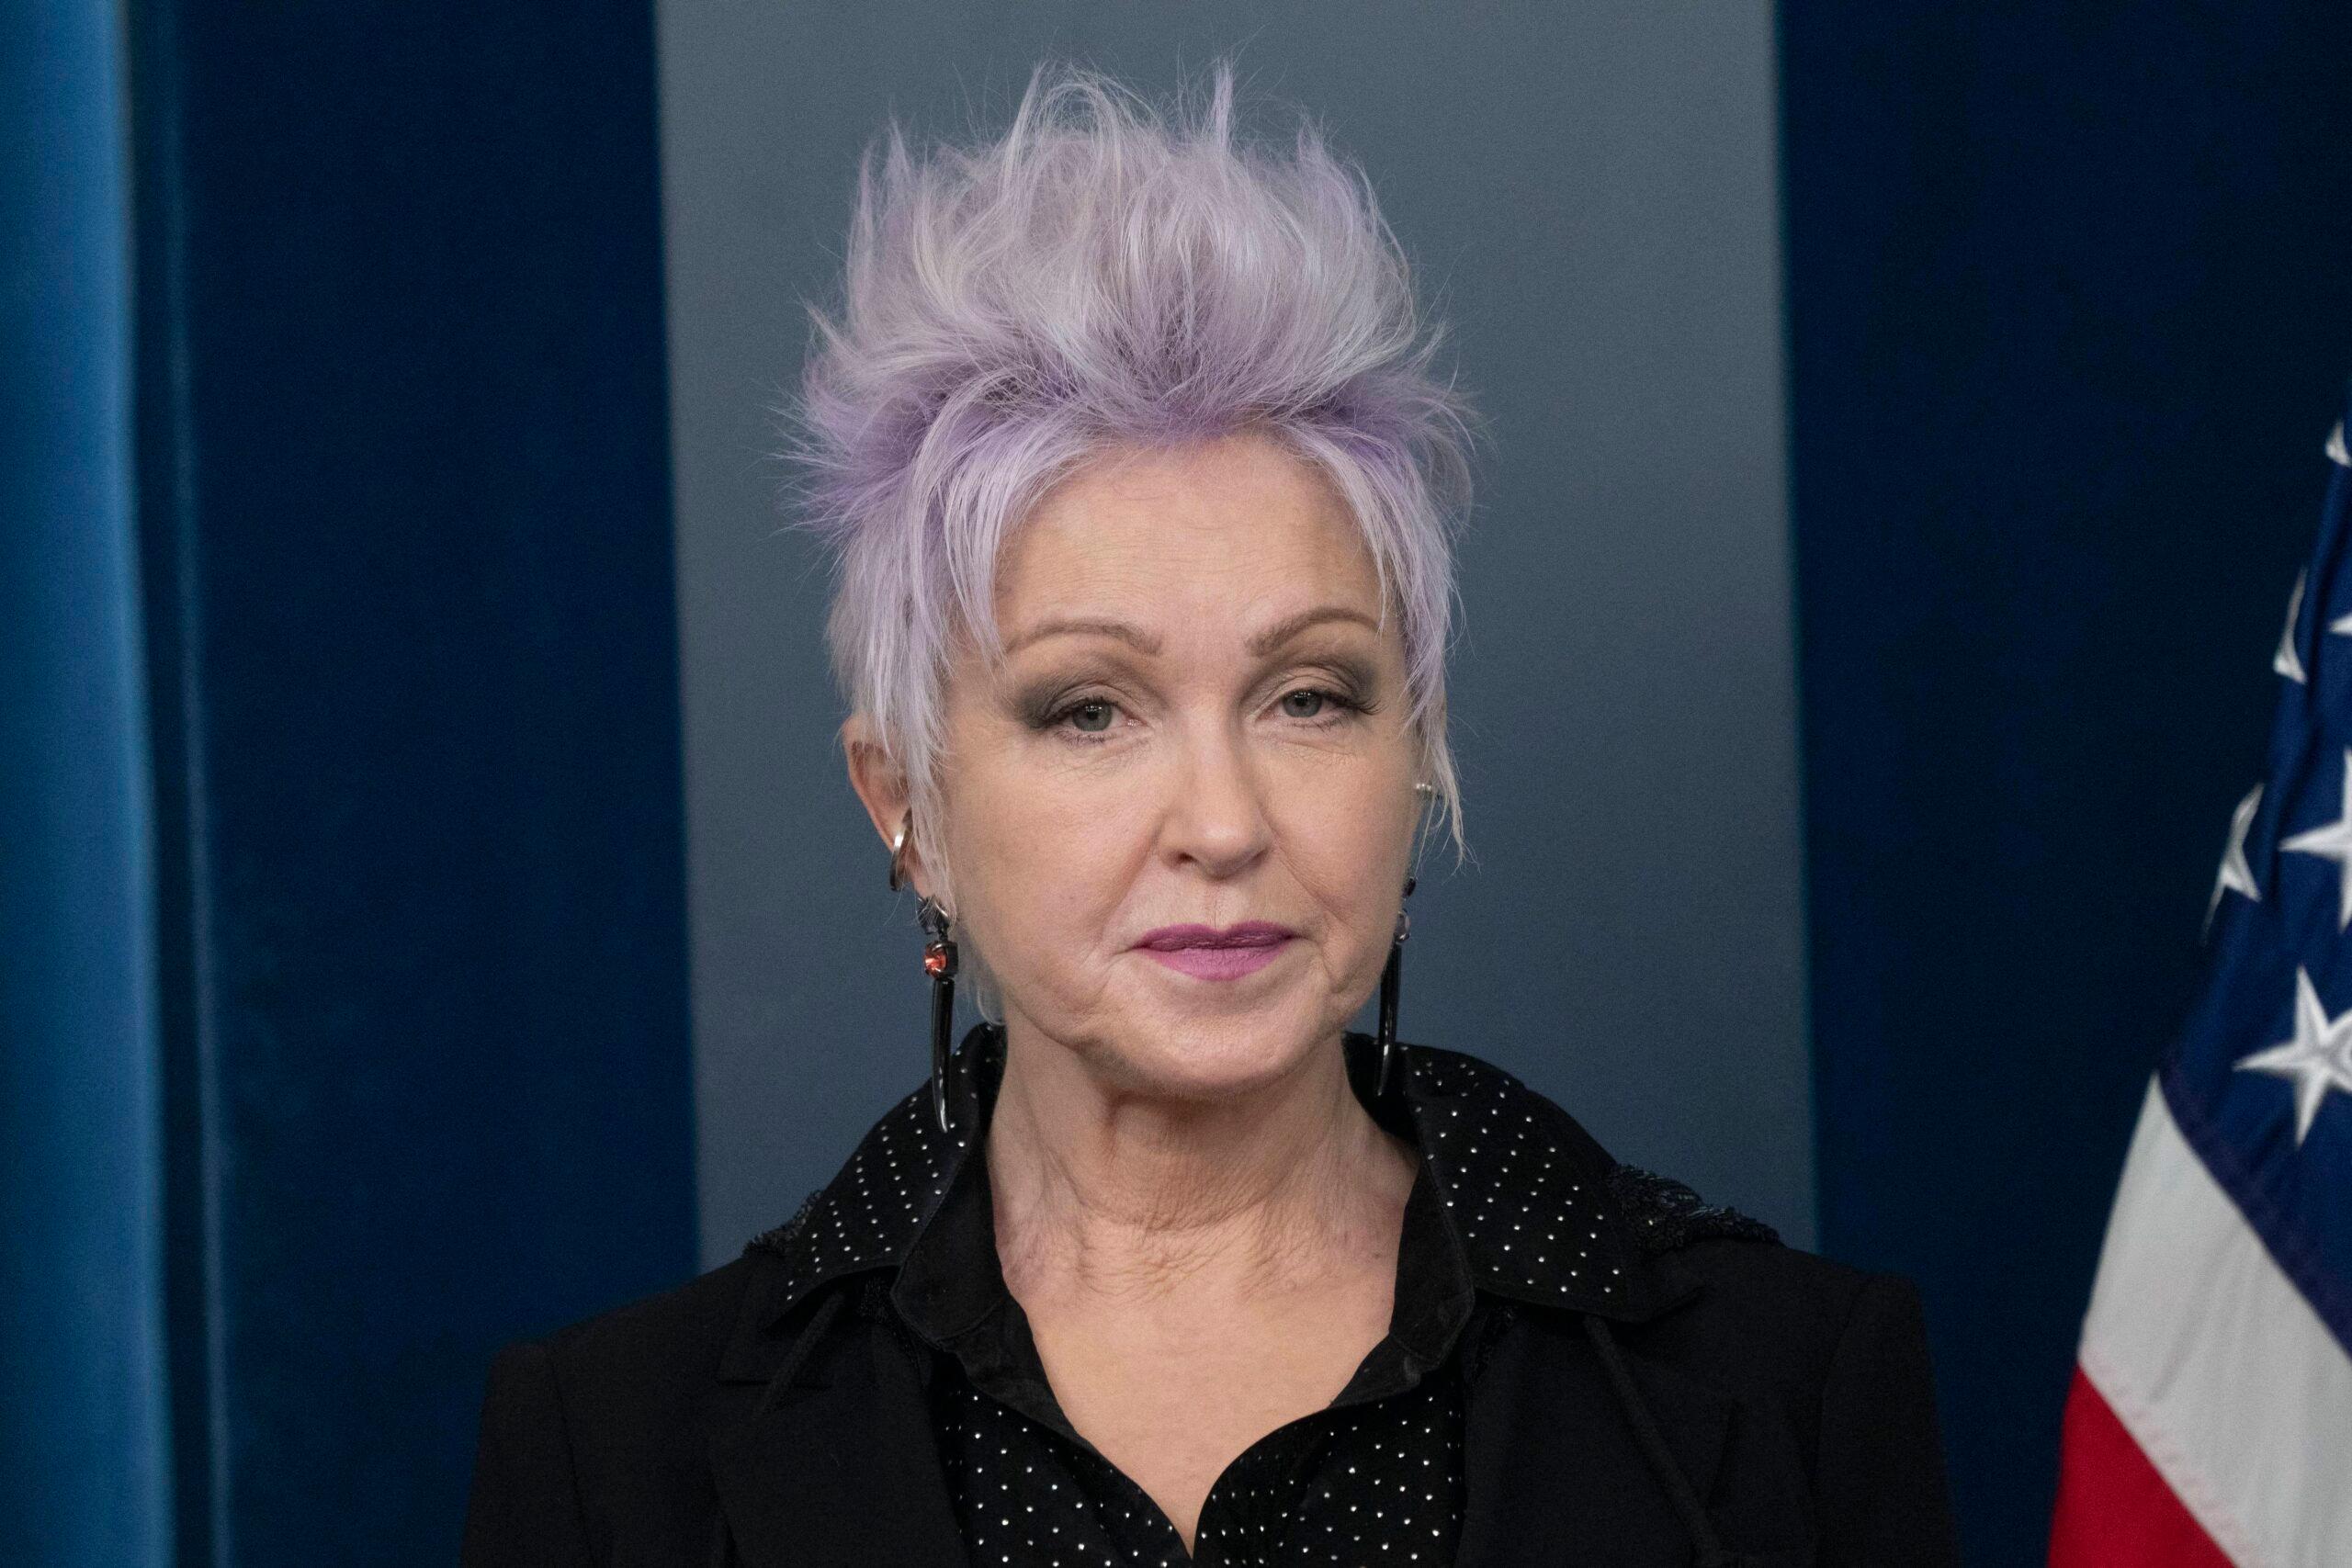 Musician Cyndi Lauper makes a statement in the briefing room